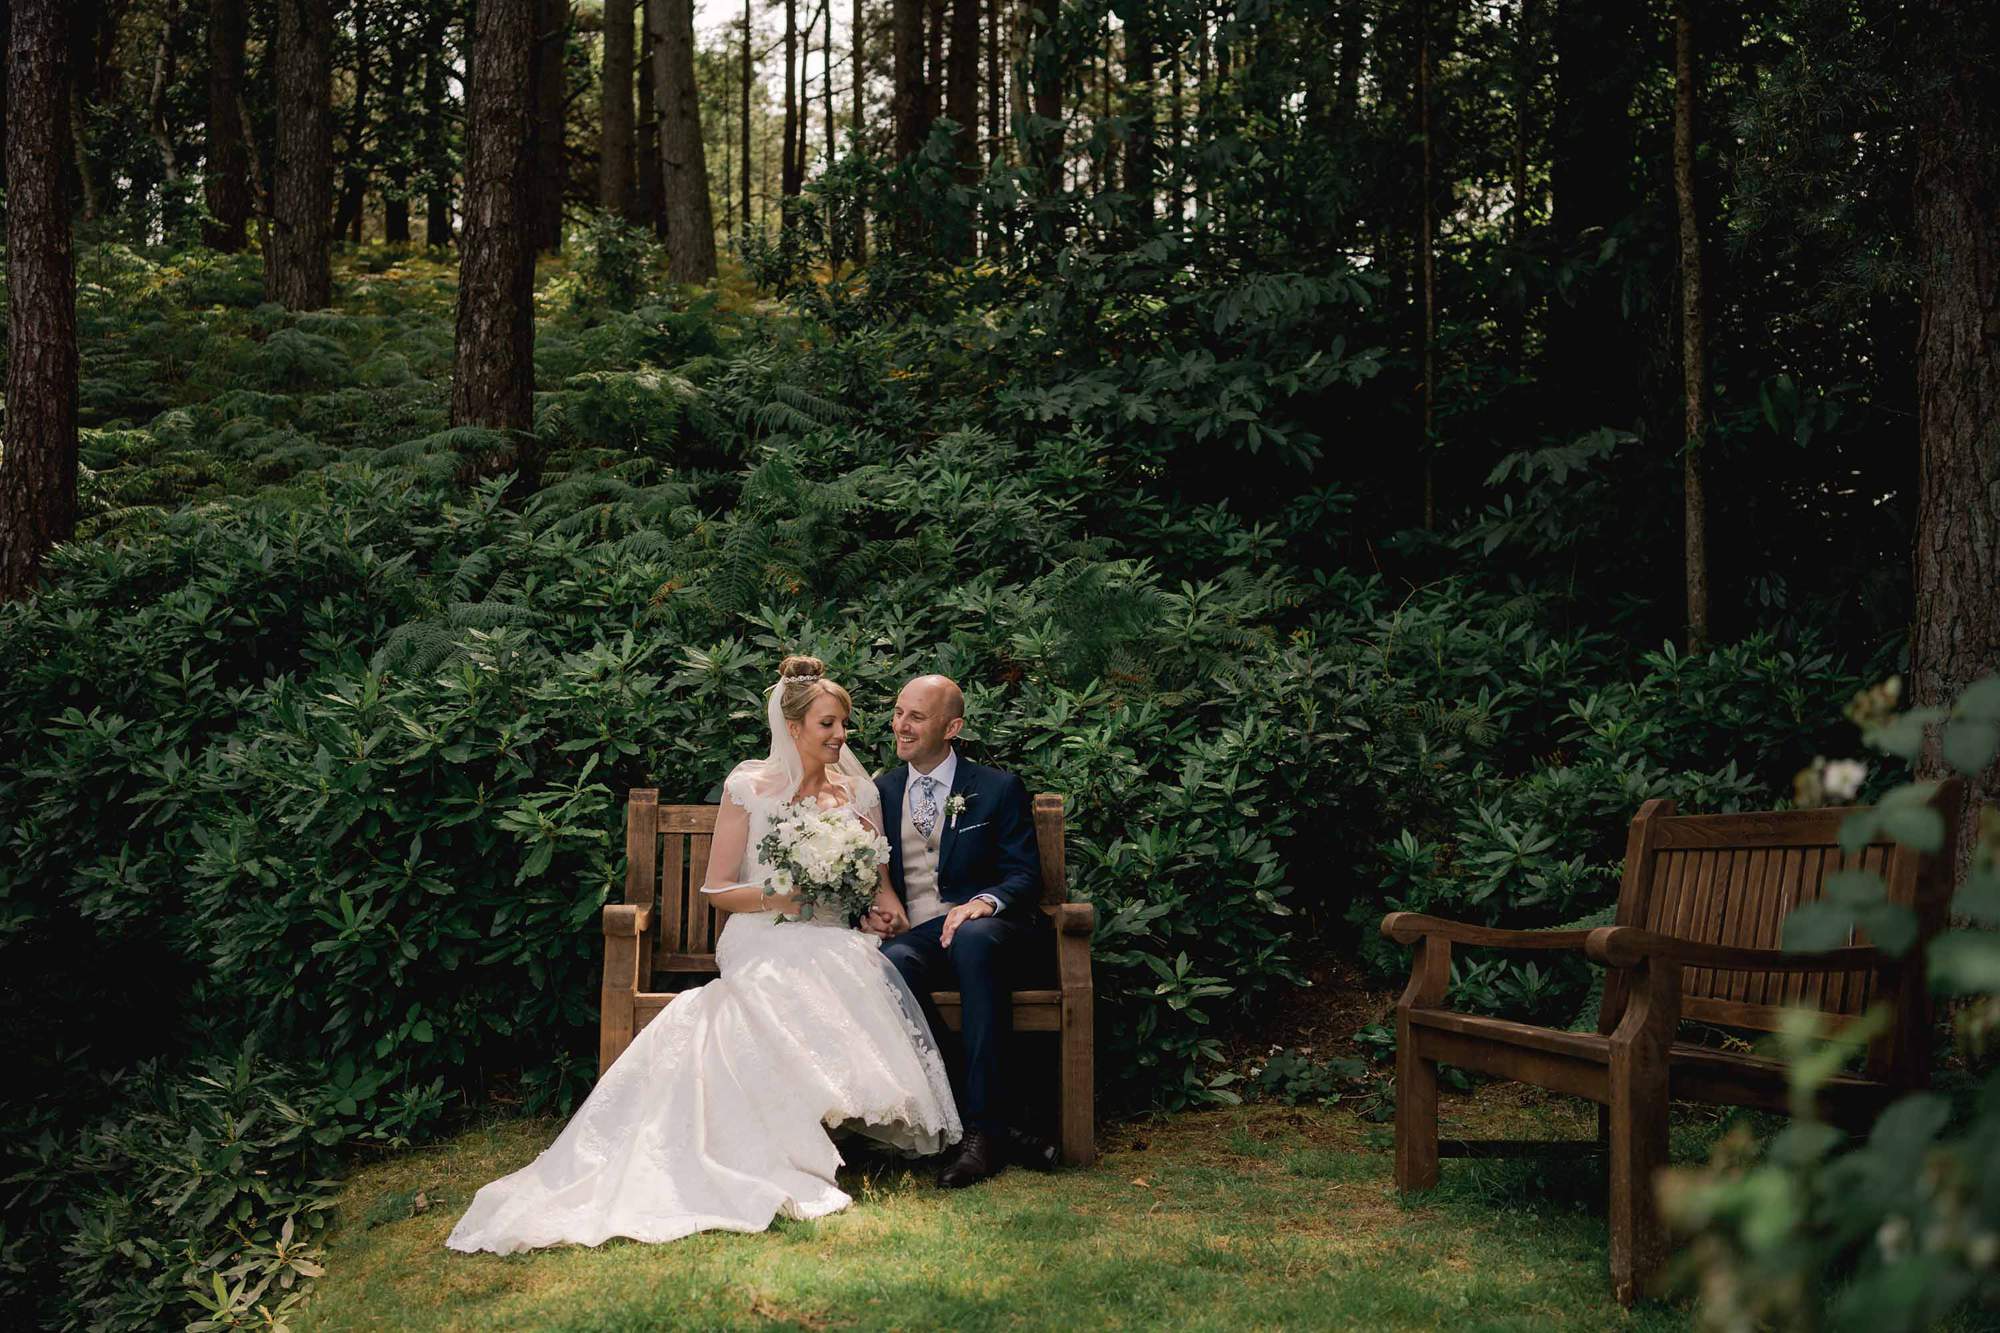 The bride and groom share a beautiful moment on a bench in the golf course at Old Thorns Hotel in Liphook.